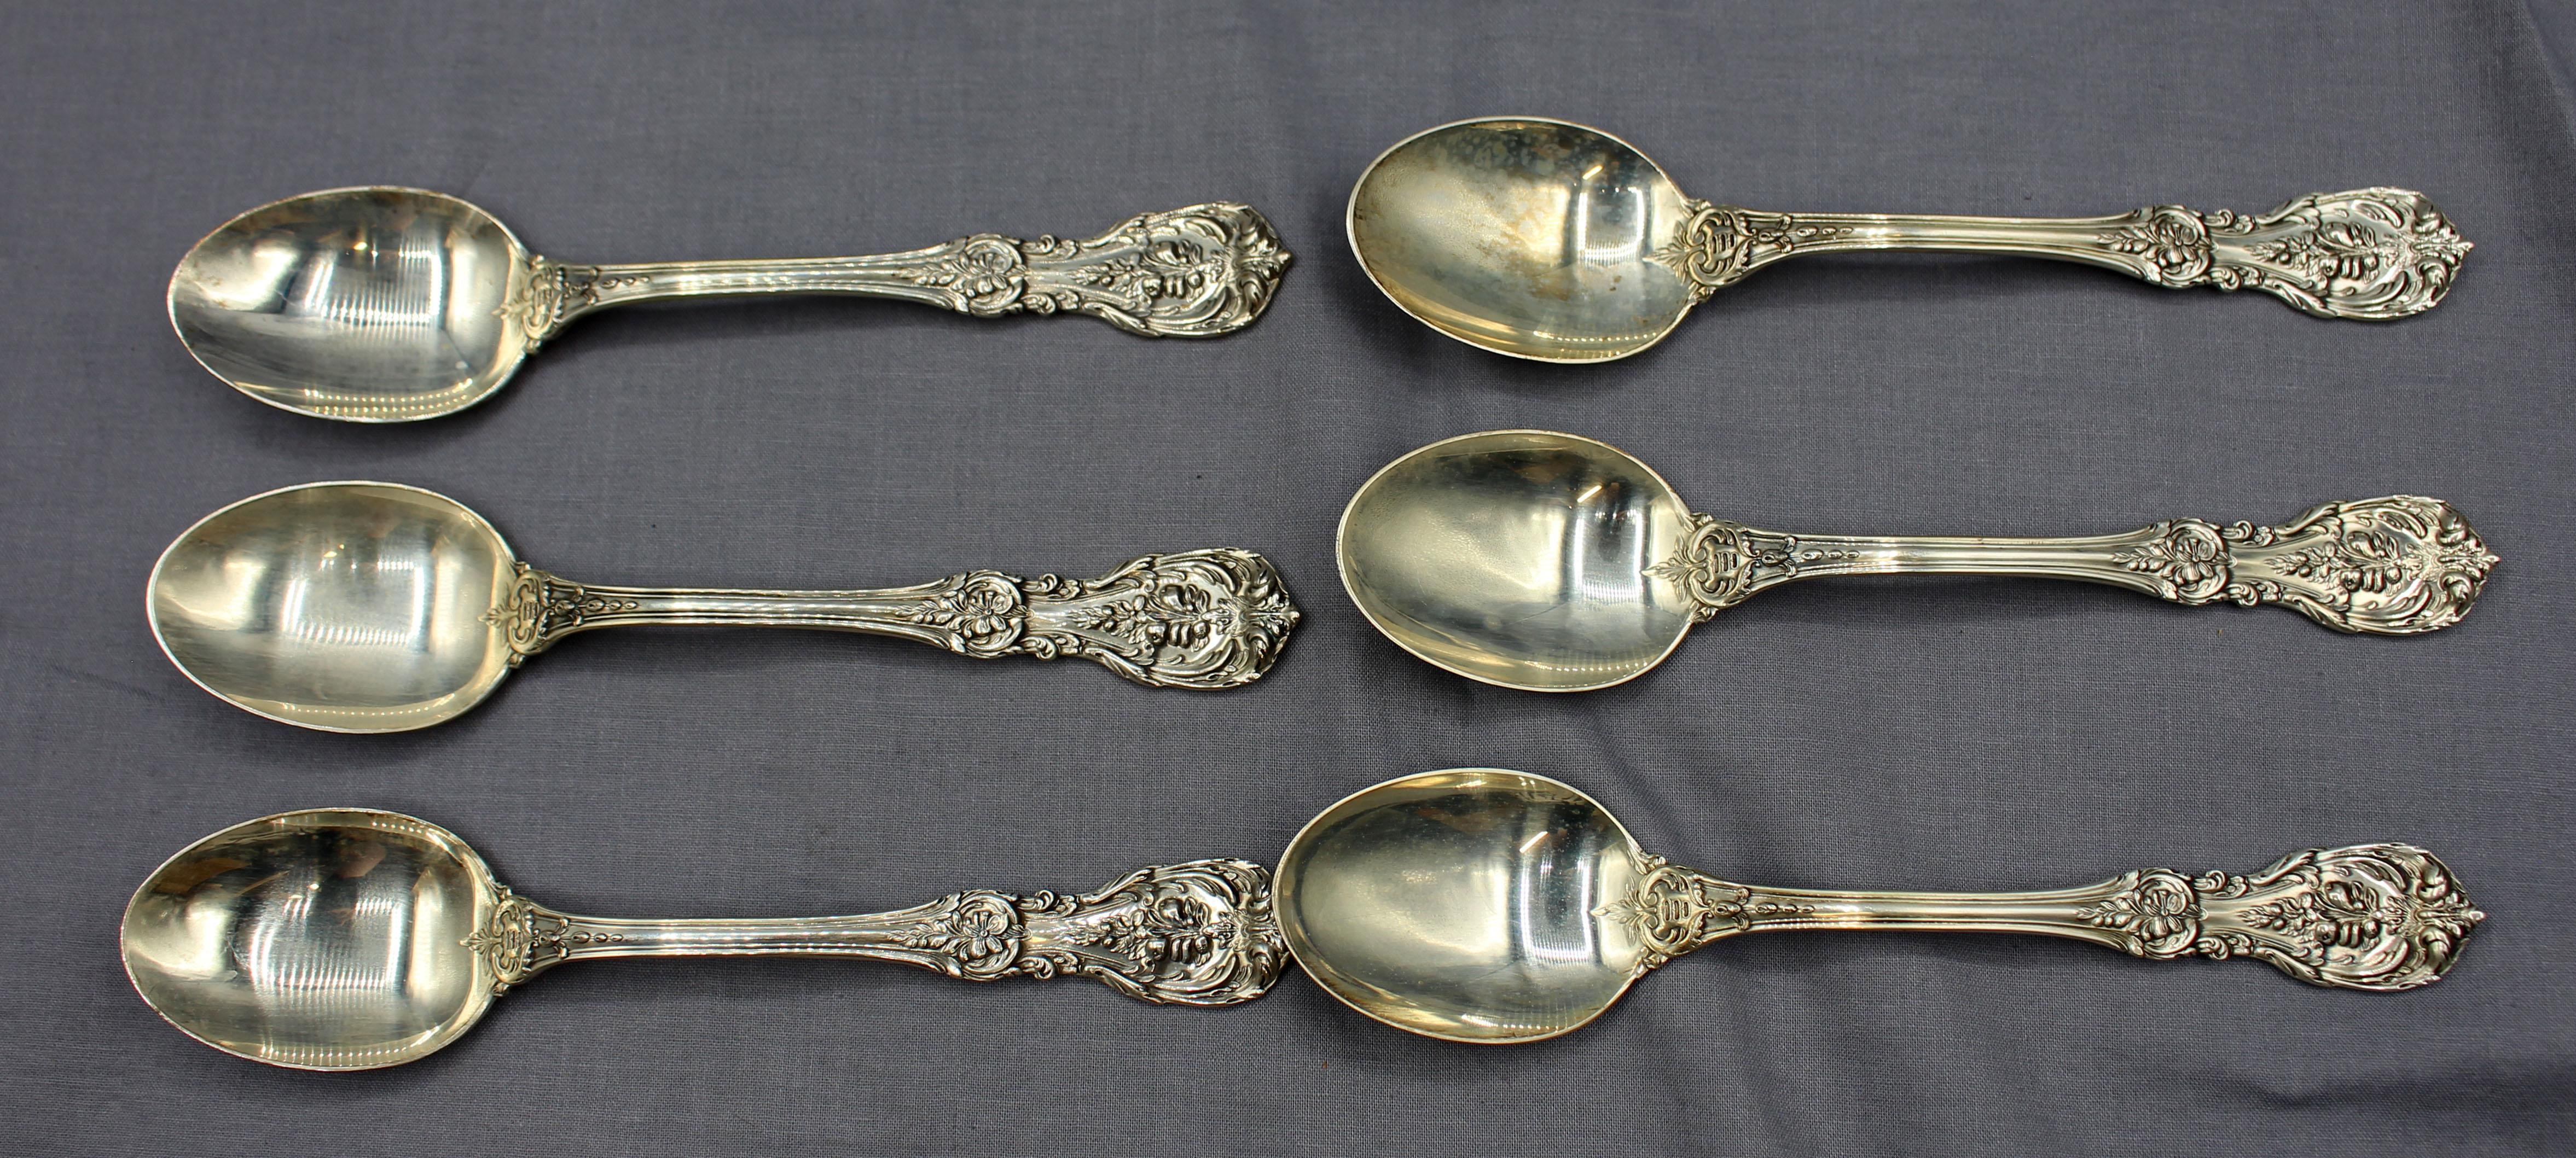 Reed & Barton Sterling Silver Flatware Service for 12 9